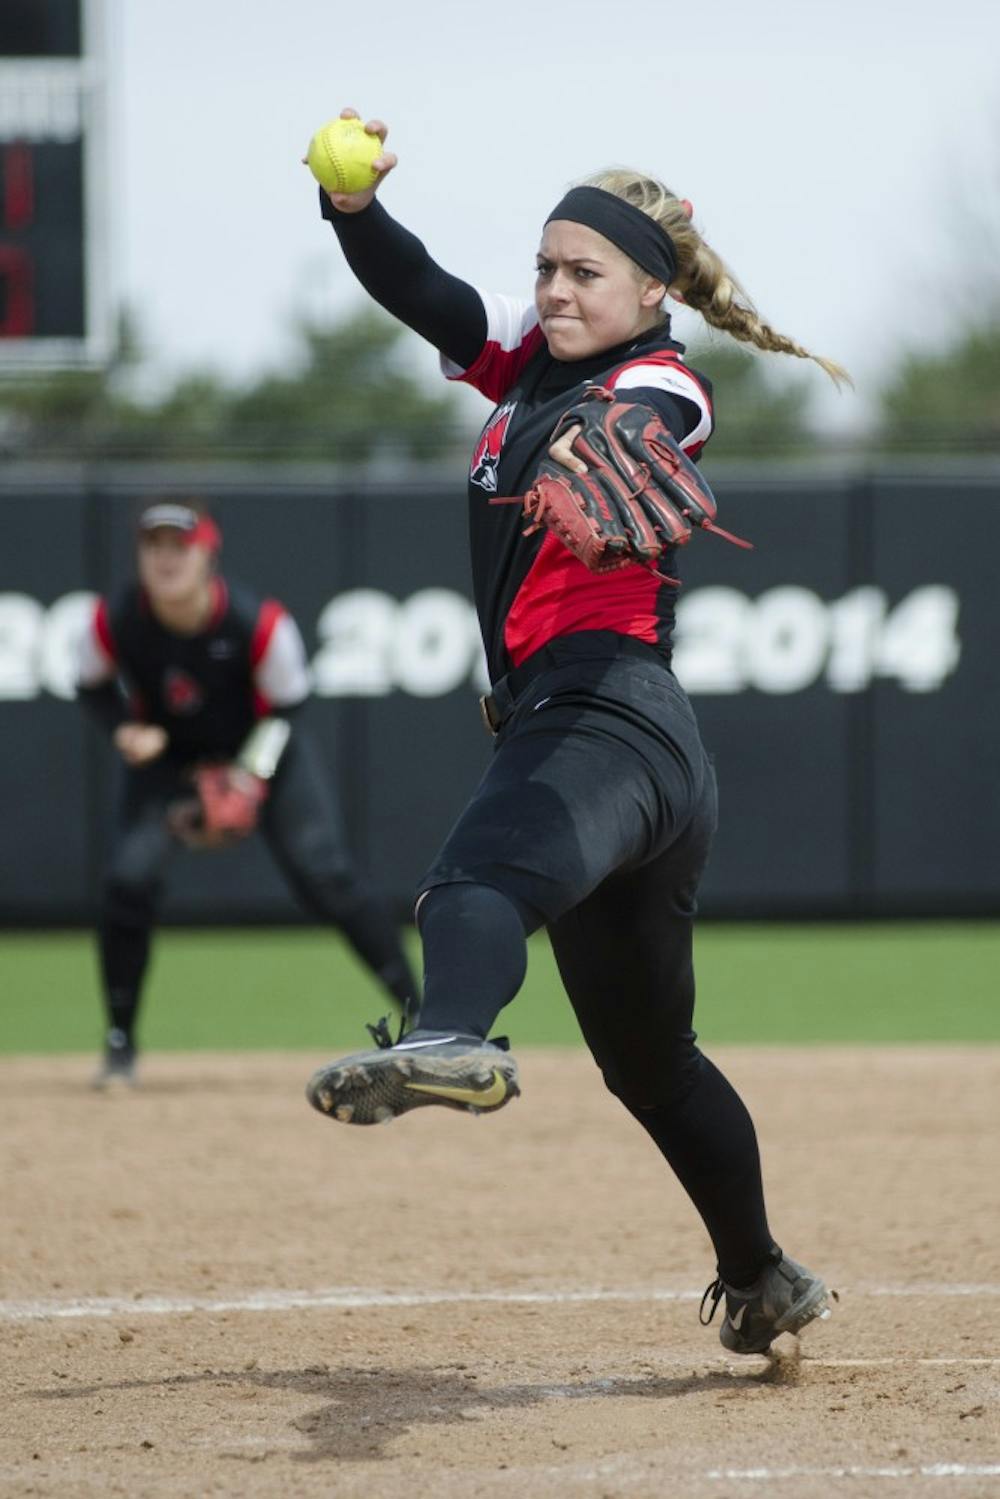 Junior pitcher Carolyn Wilmes pitches the ball during the game against Miami University on April 2 at the First Merchants Ballpark Complex. Ball State won 6-3 to complete the three-game sweep against the RedHawks. Emma Rogers // DN